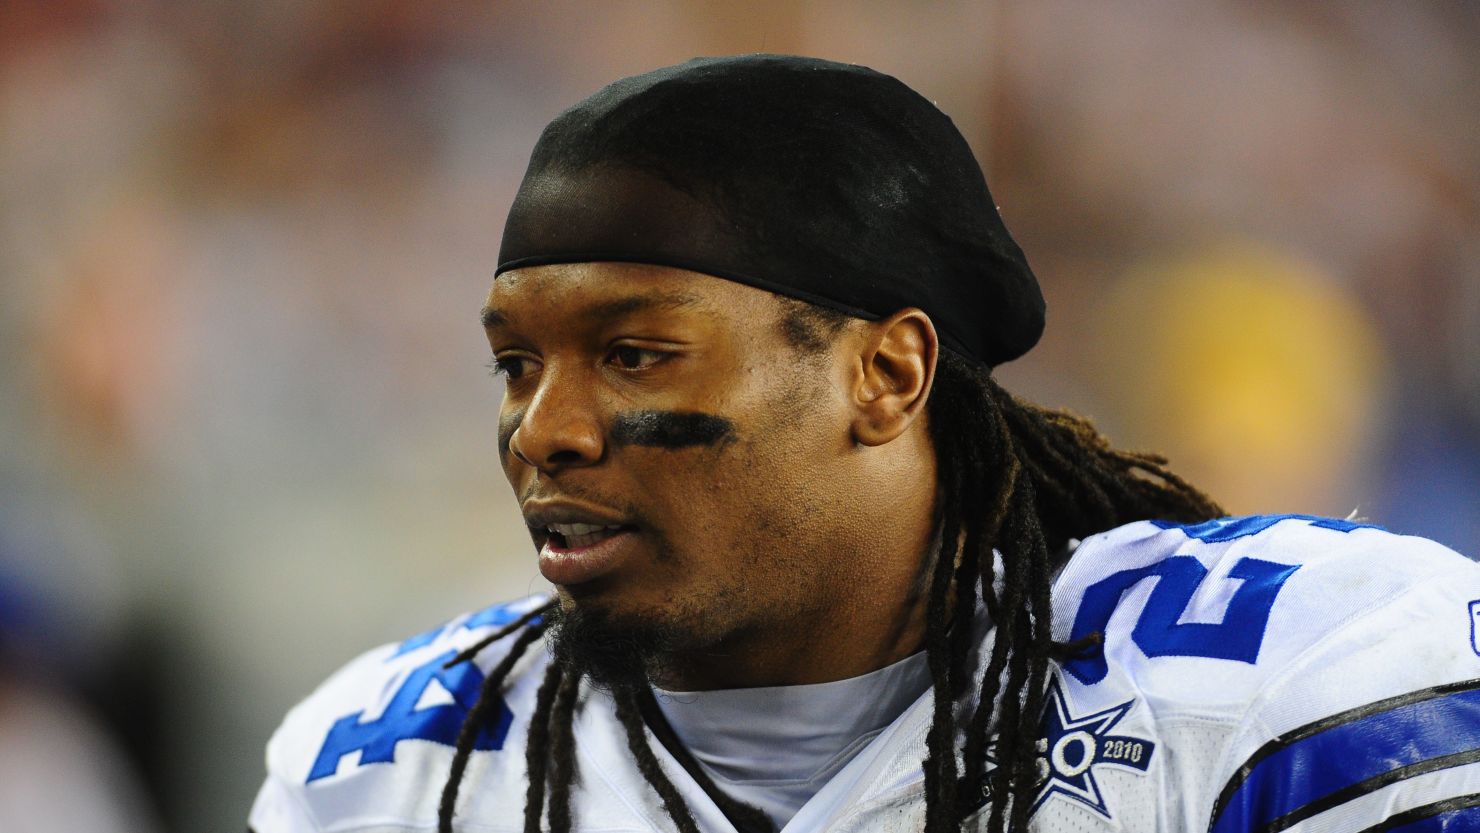 Former Dallas Cowboys running back Marion Barber was found dead on Wednesday in Frisco, Texas.